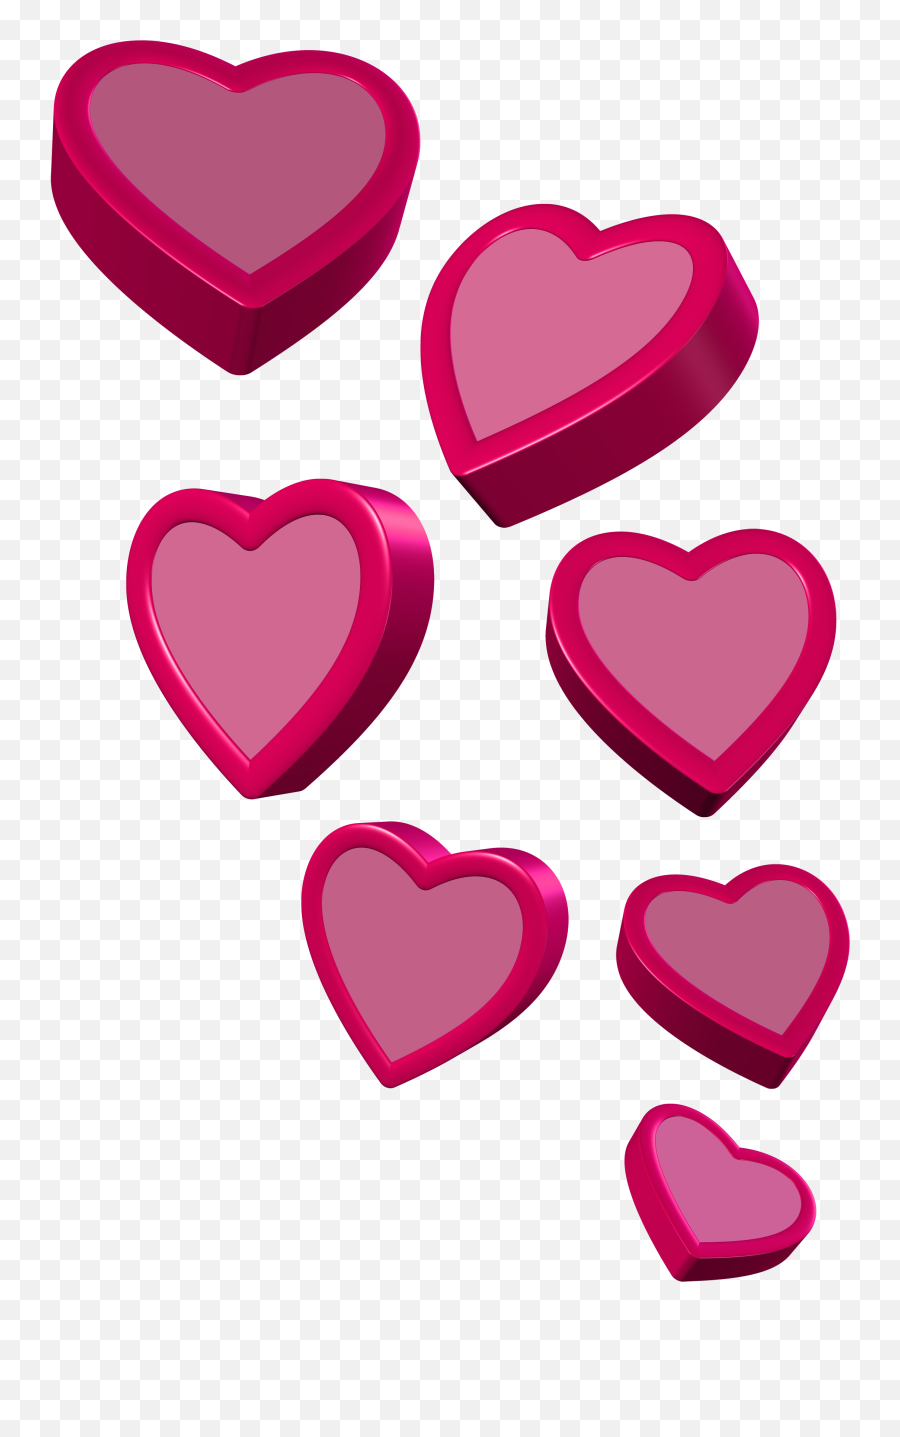 Hearts Clipart Pink Hearts Pink Transparent Free For - 7 Hearts Emoji,Hearts Clipart